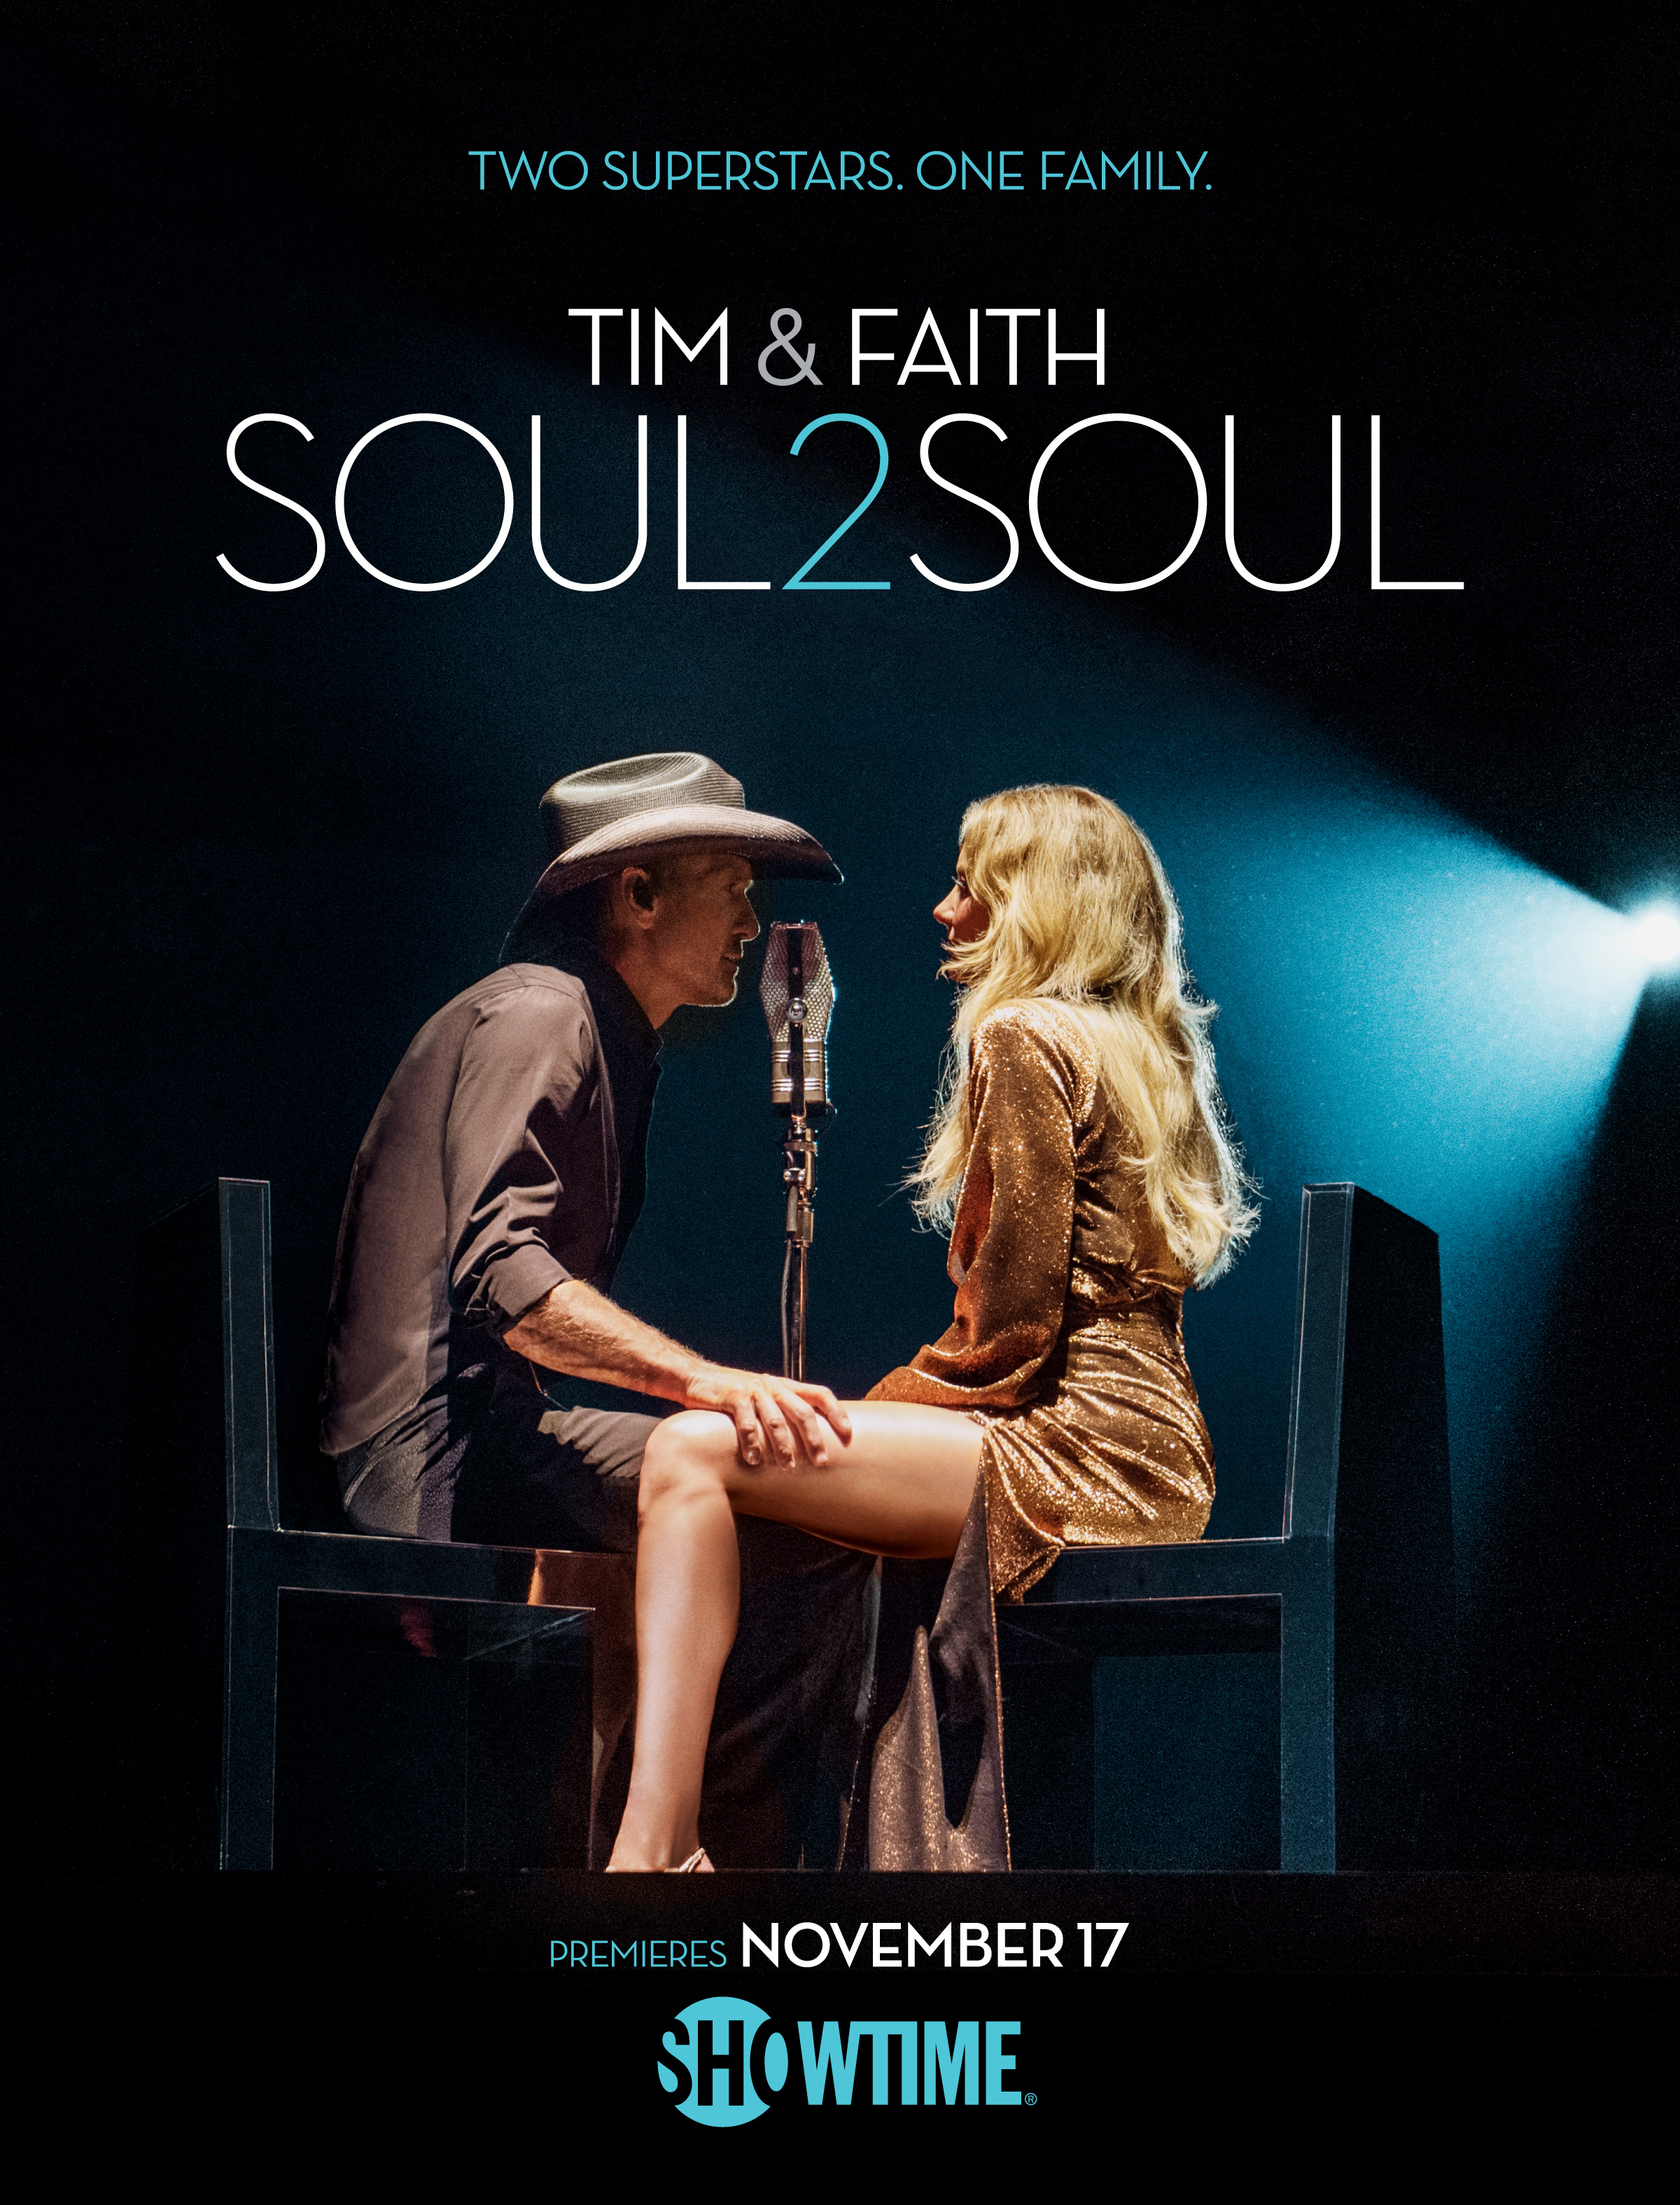 Tim McGraw and Faith Hill - Soul2Soul Image